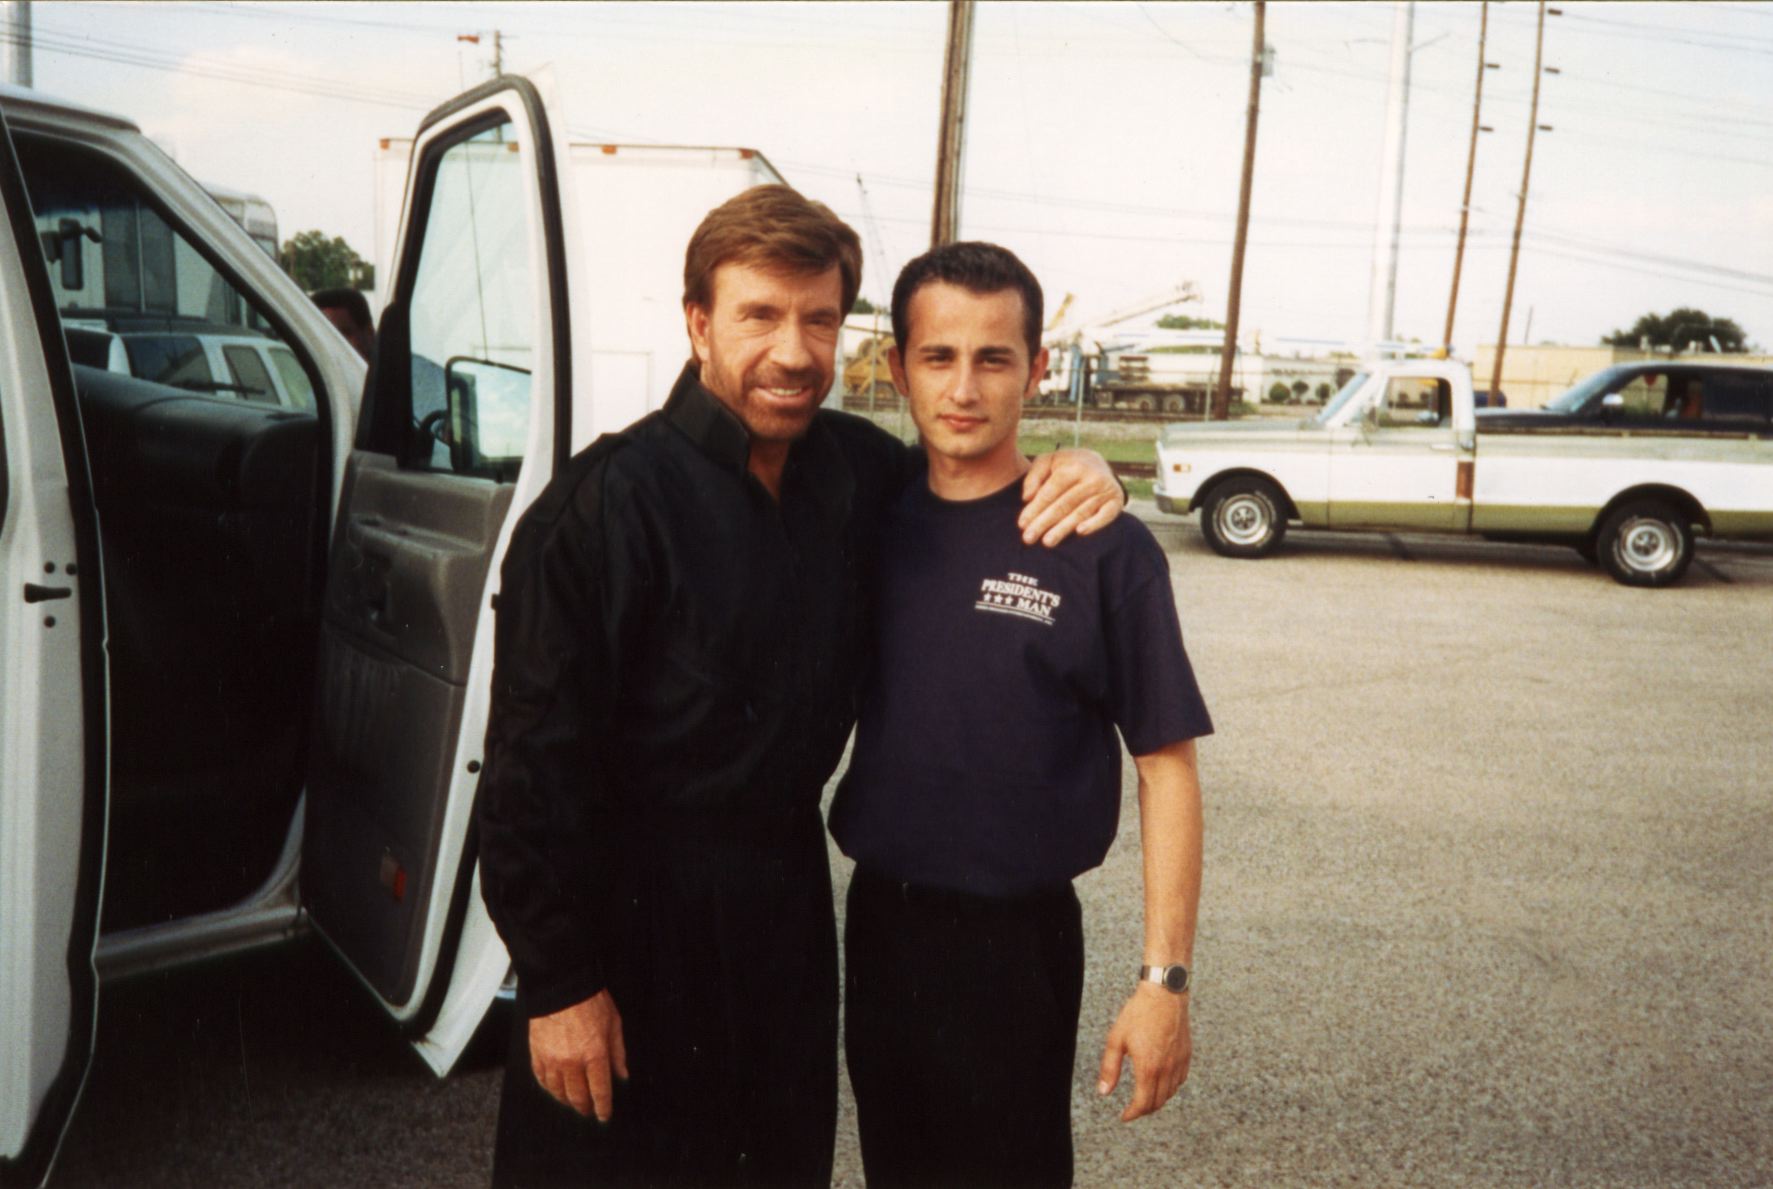 The Presidents Man II, Chuck Norris and Ali Afshar